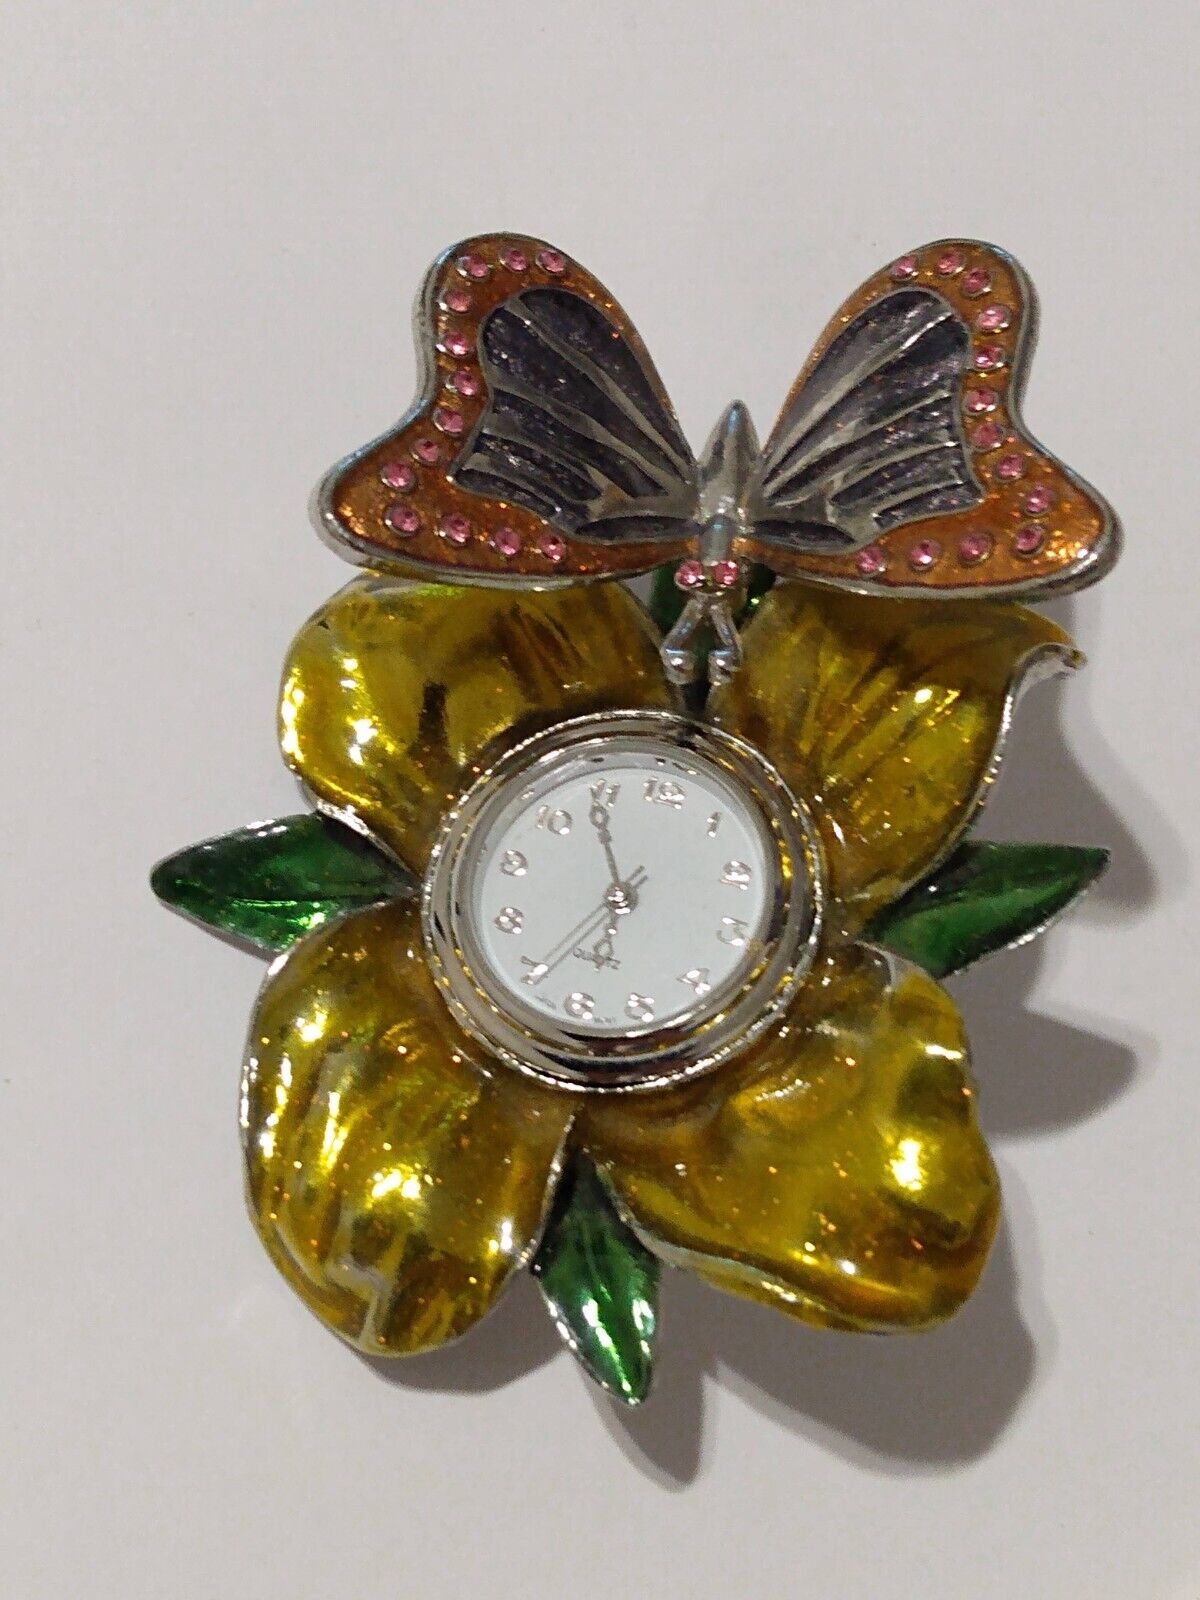 Flower Butterfly Desk Table Clock Nonworking Untested For Parts or Repair